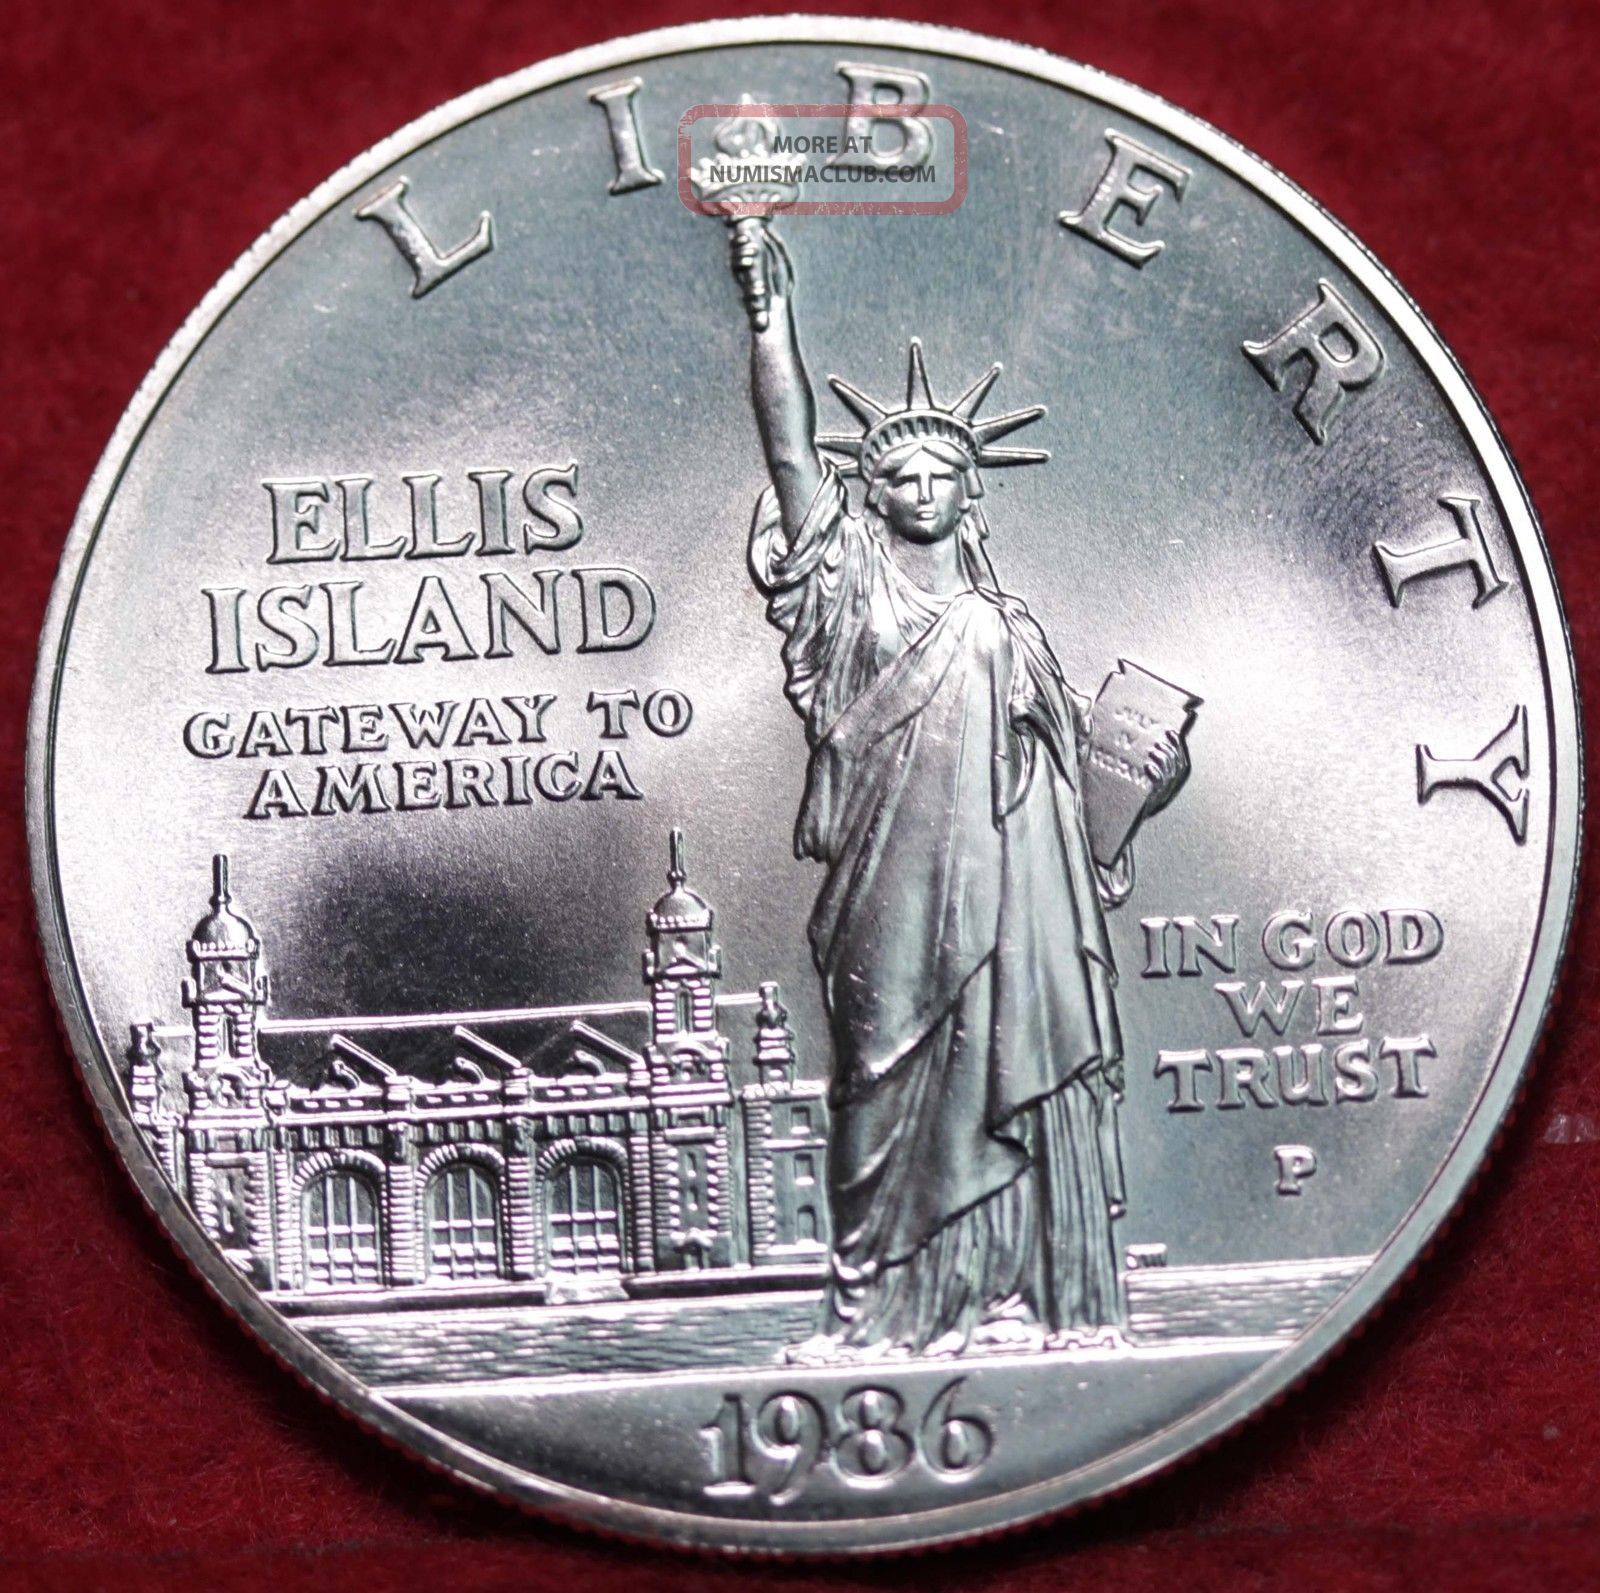 value of a 1986 proof ellis island liberty coins silver dollar